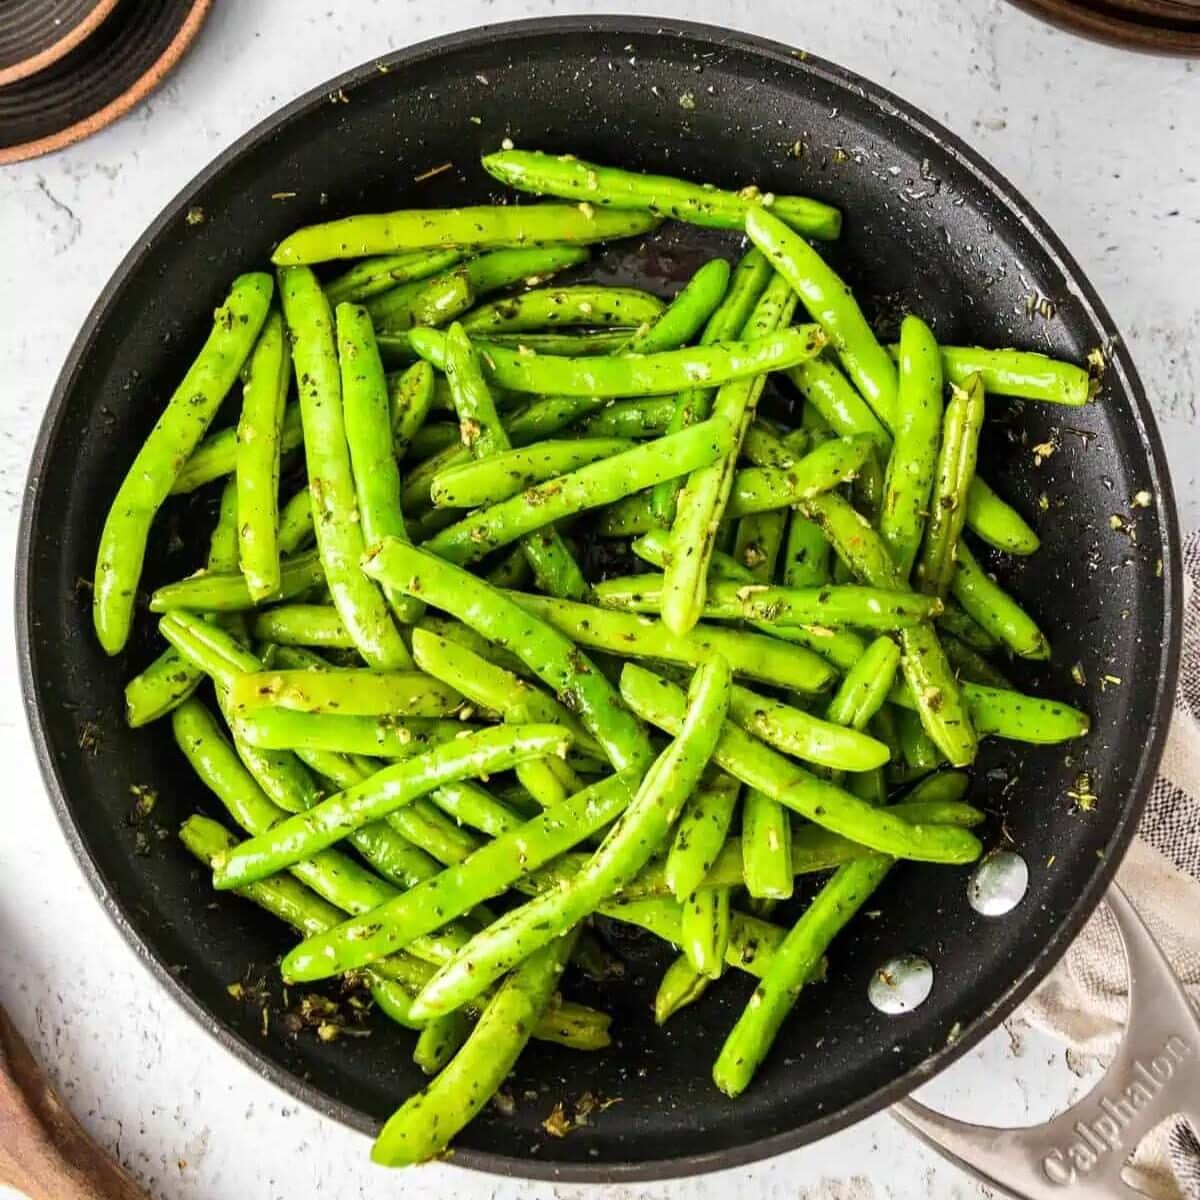 Sauteed green beans in a skillet.